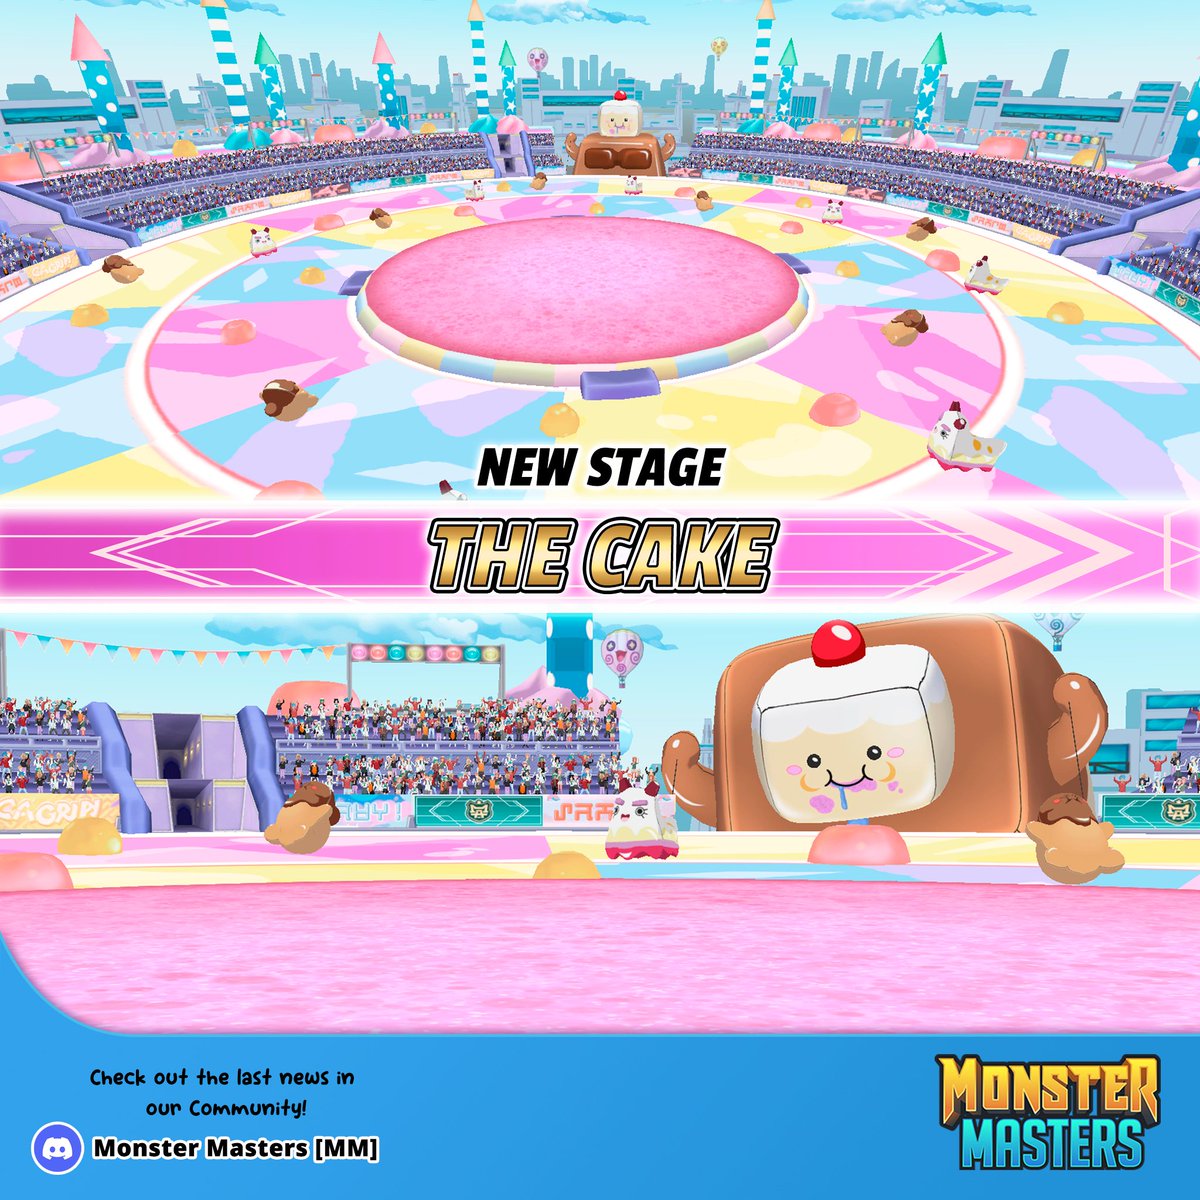 New huge stage revealed! Only hungry trainers allowed! ✨✨😂

#monstermasters #mobilegames #anime #fakemon #pokemon #gaming #games #gameplay #iosgames #androidgames #freetoplay #gamedesign #indiegames #twitch #mobilegaming #monsterbattles